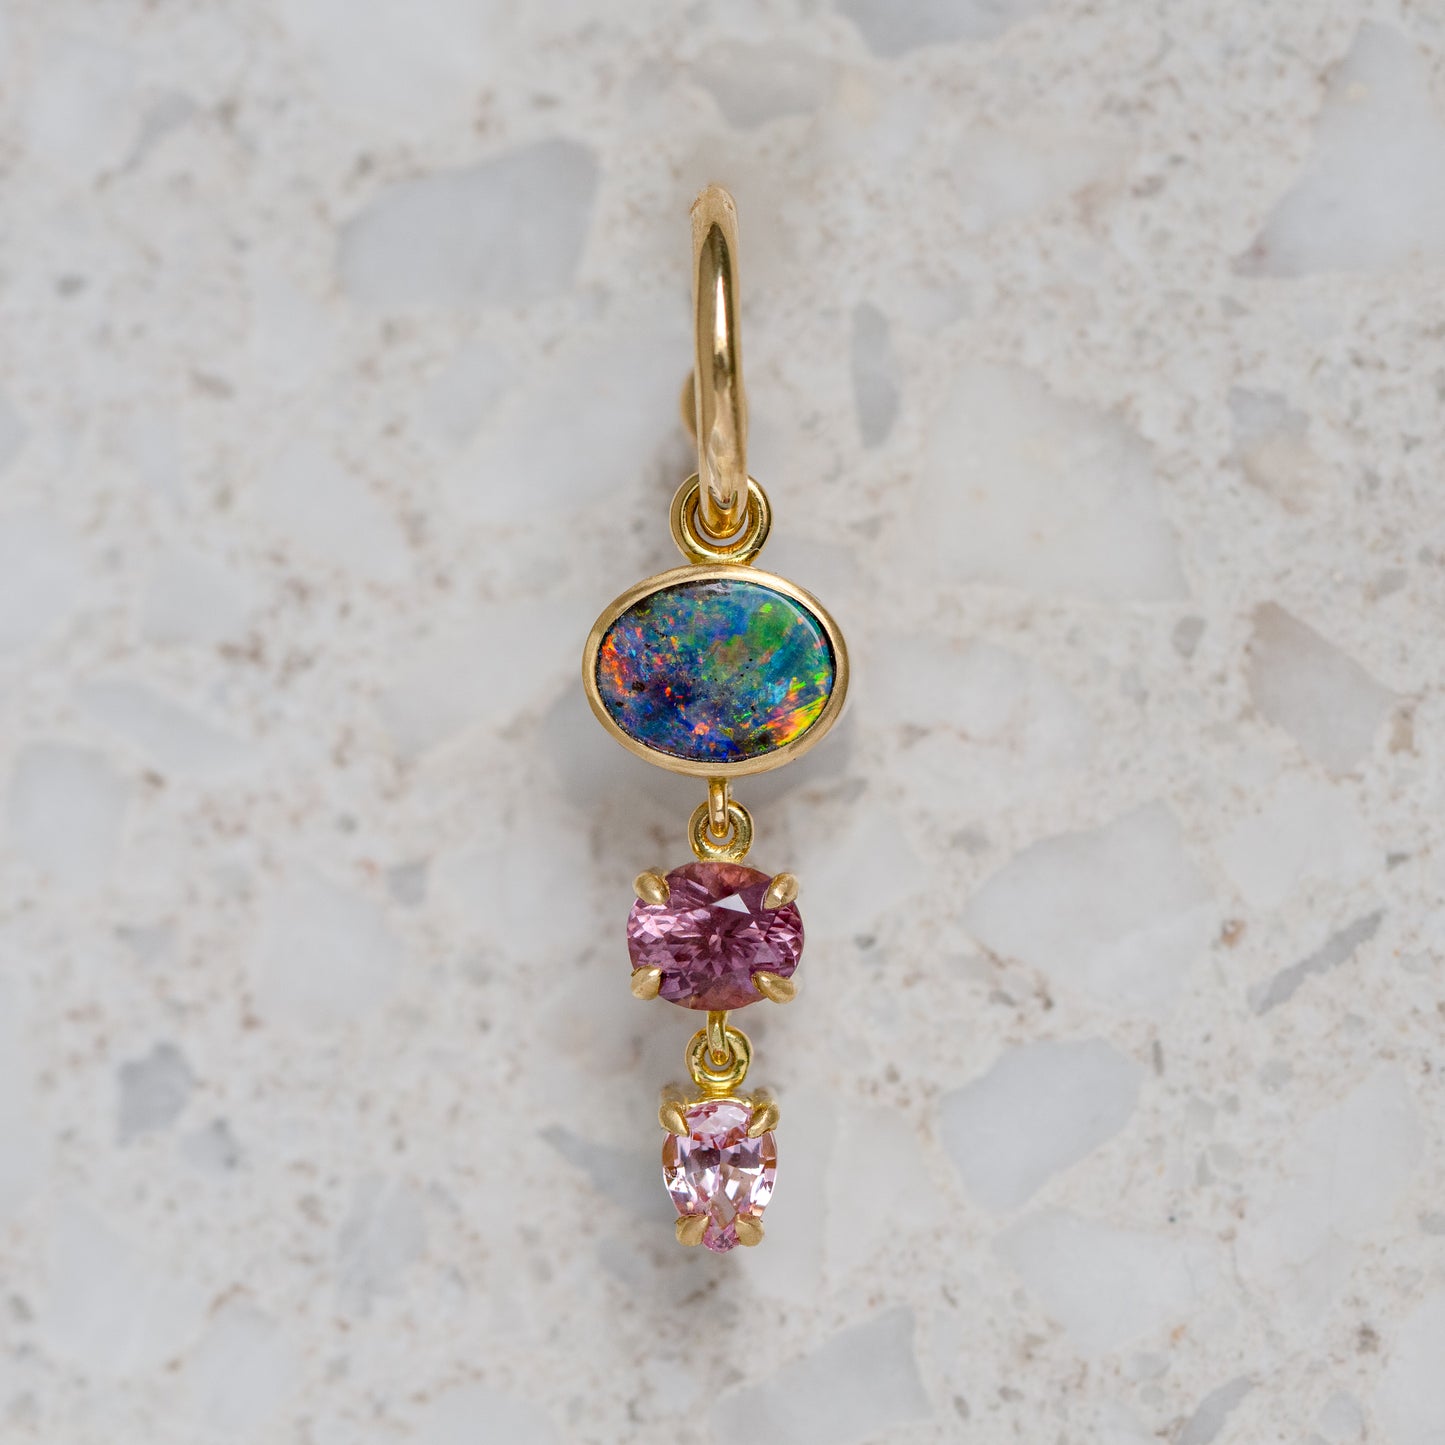 Boulder Opal and Spinel Charm Earrings in 18ct Yellow Gold (In Stock)